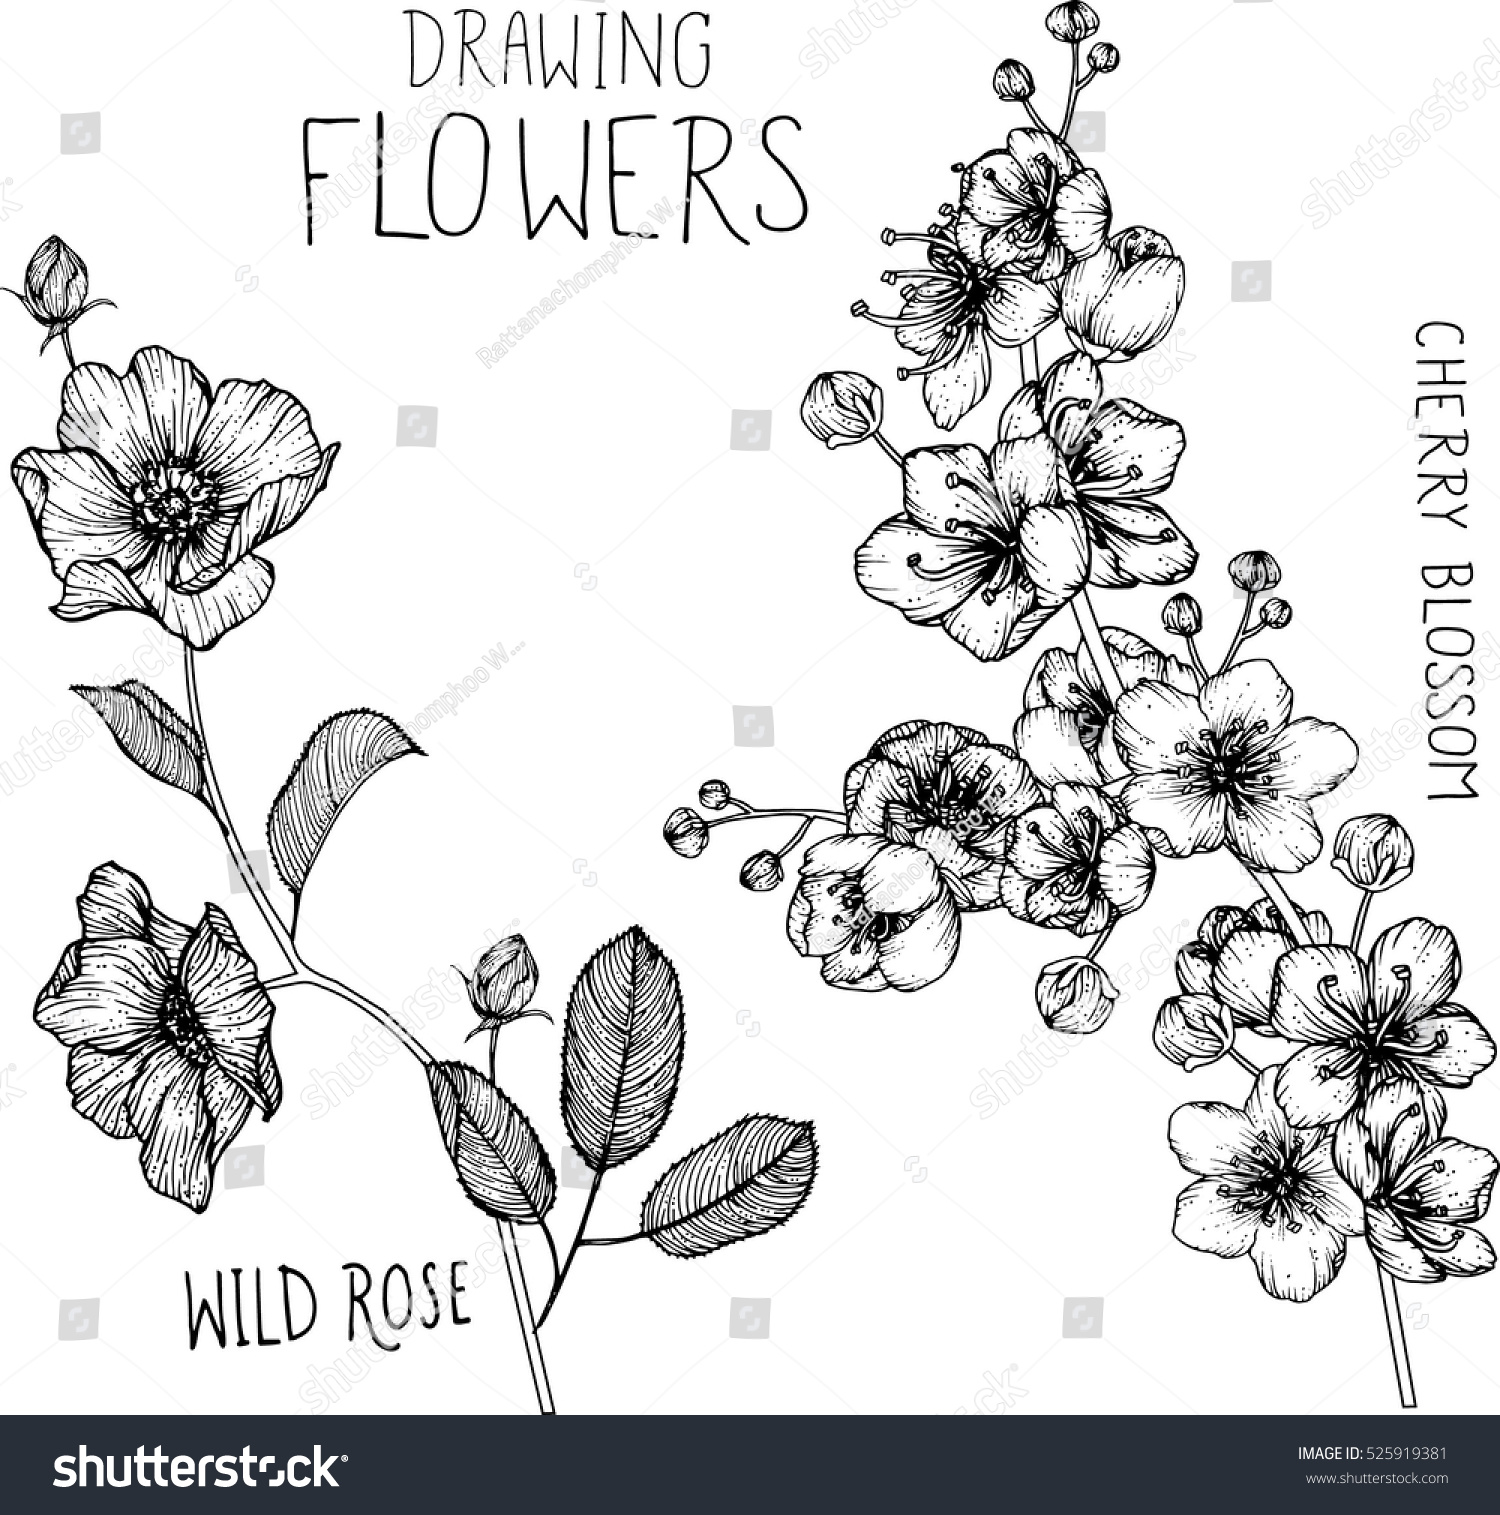 drawing flowers. Wild roses and cherry blossom clip-art or illustration. #525919381